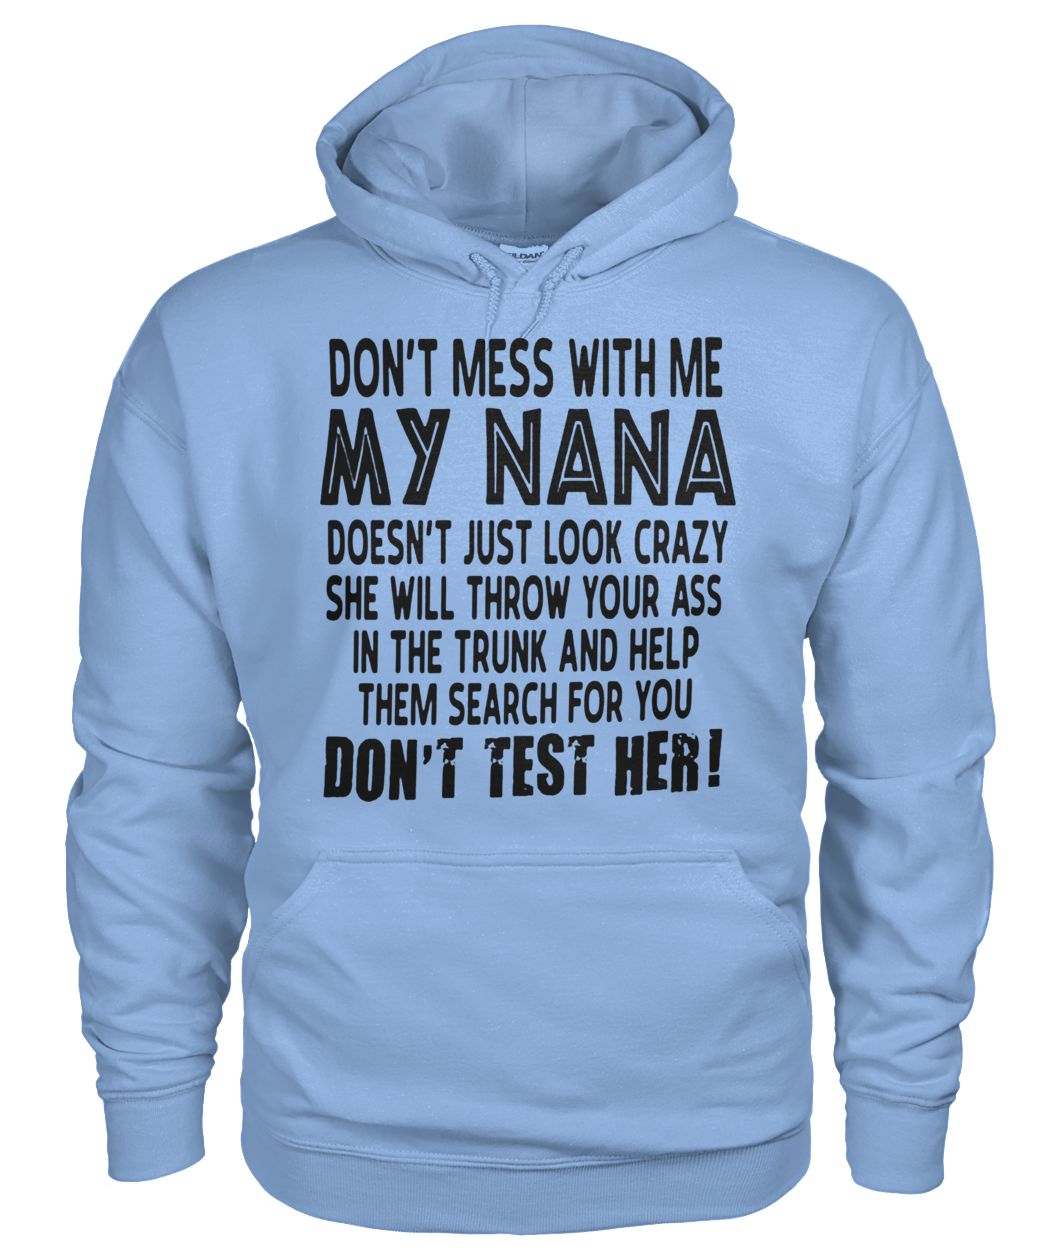 Don't mess with me my nana doesn't just look crazy don't test her gildan hoodie